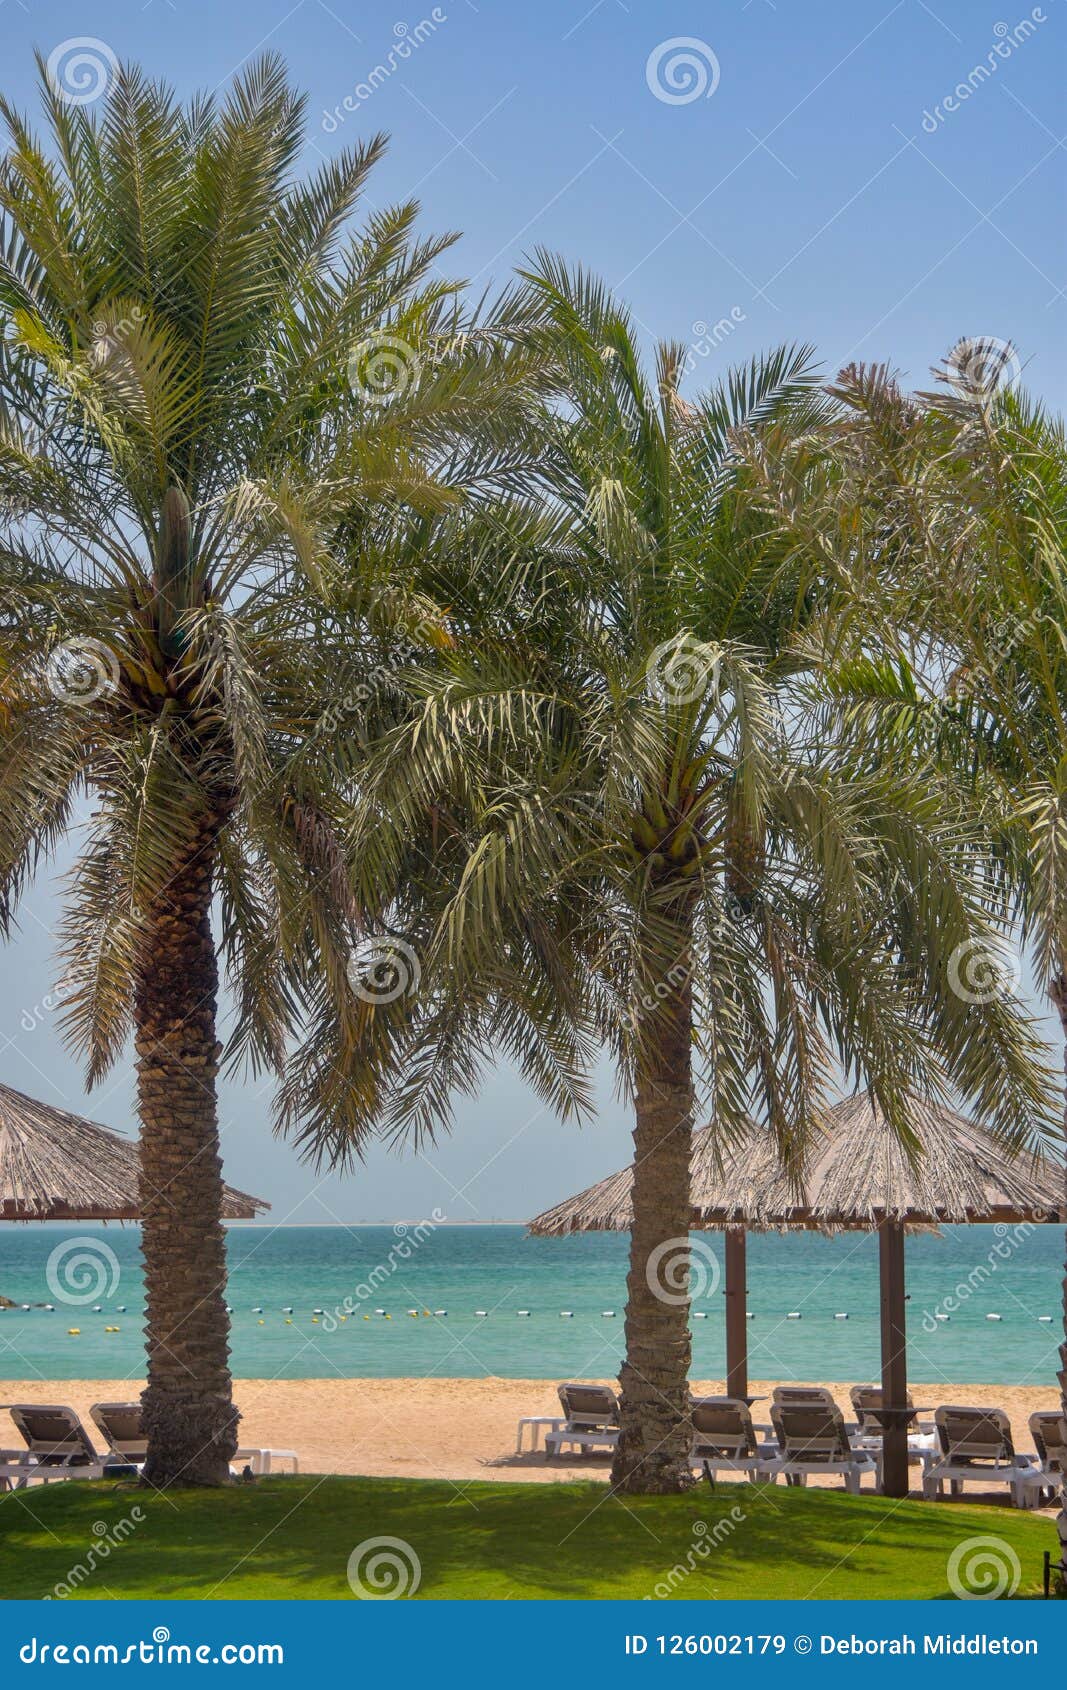 palm trees overlooking barsa bay